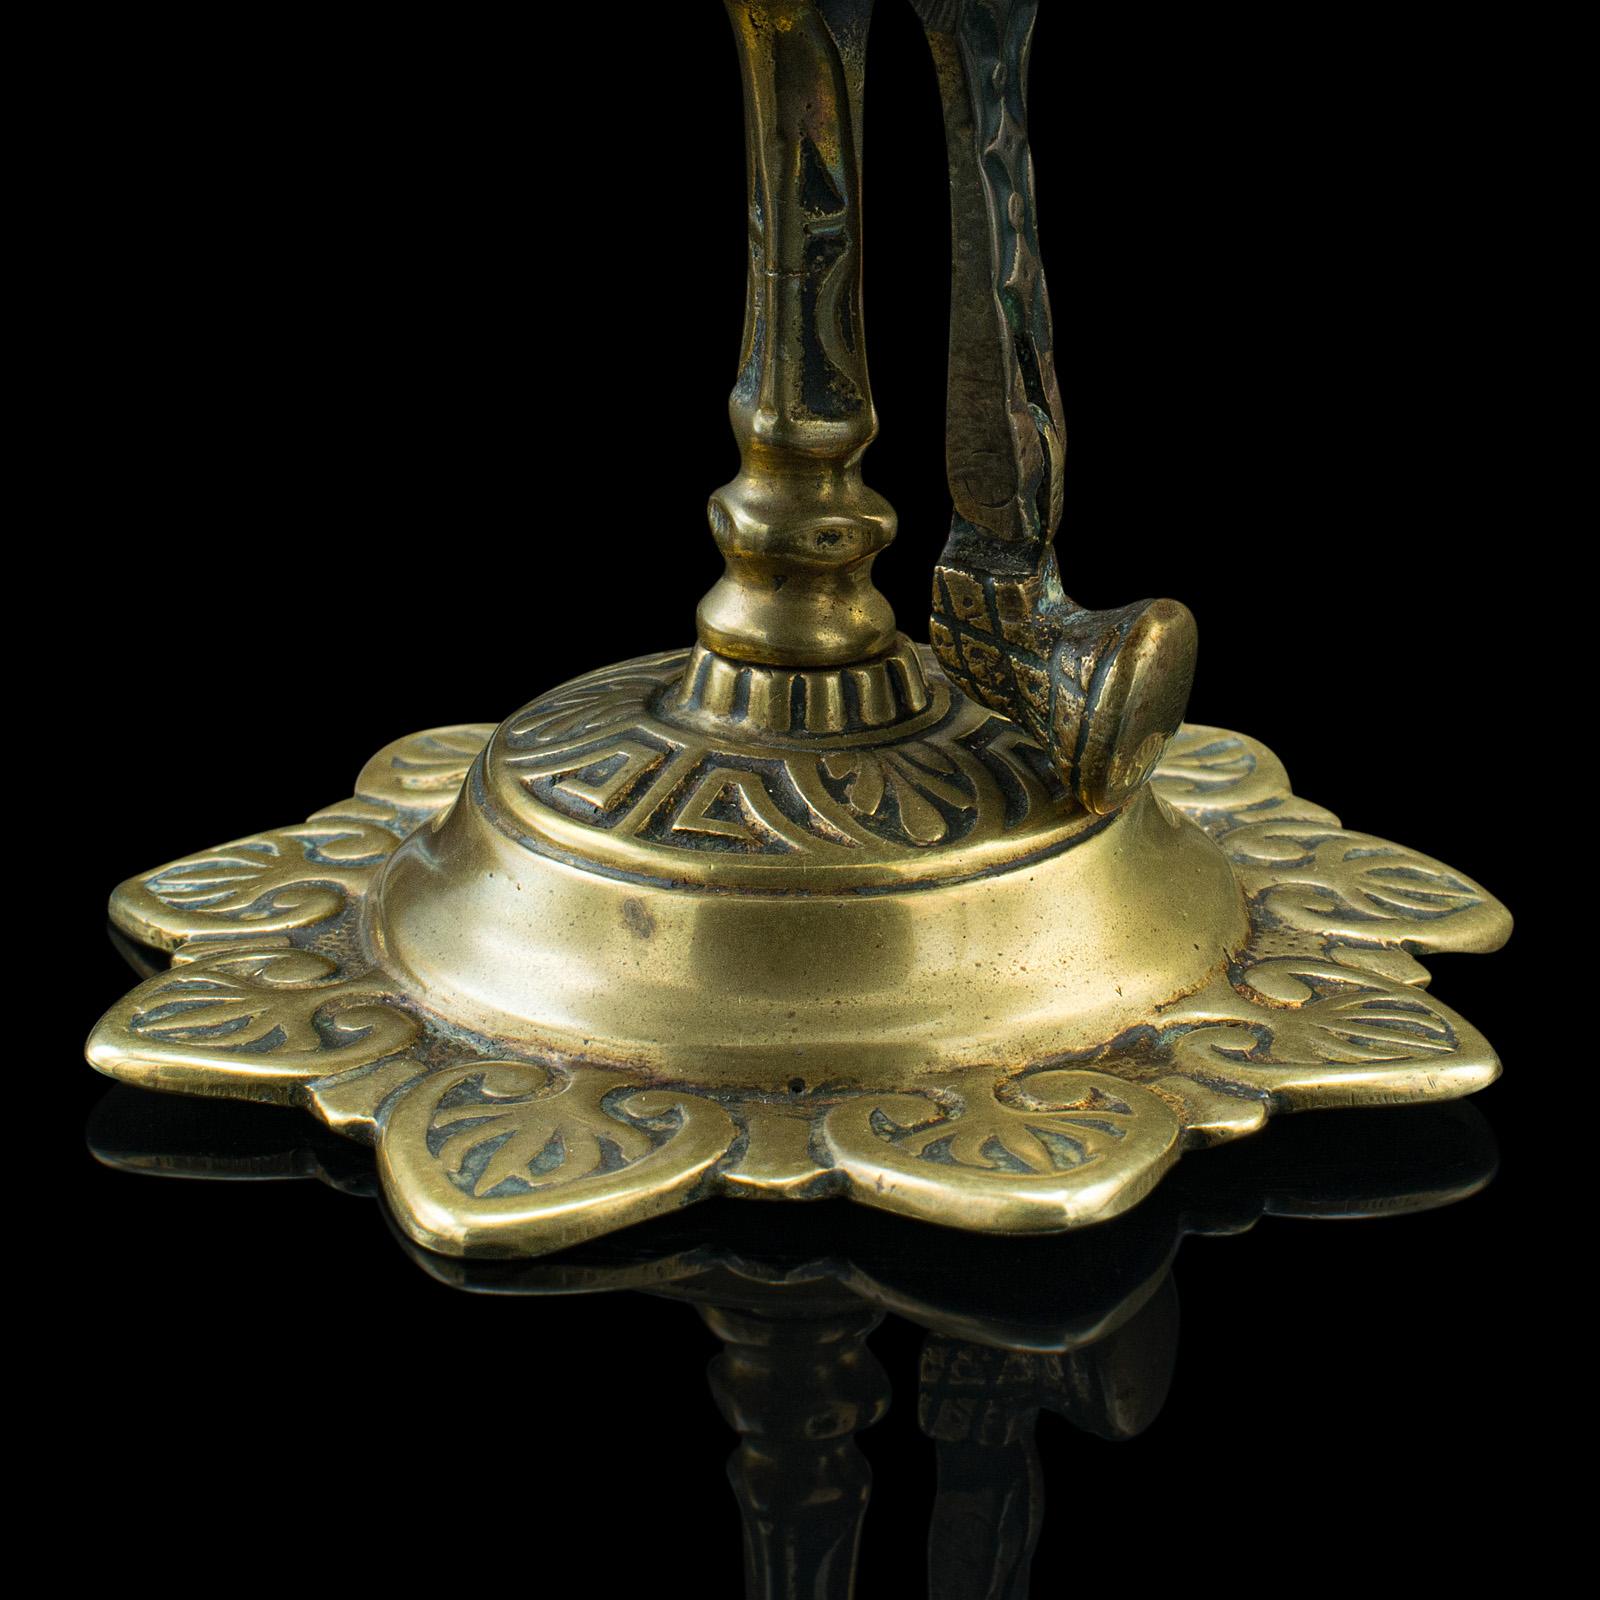 Antique Reception Bell, English, Brass, Country House, Counter Top, Victorian 1